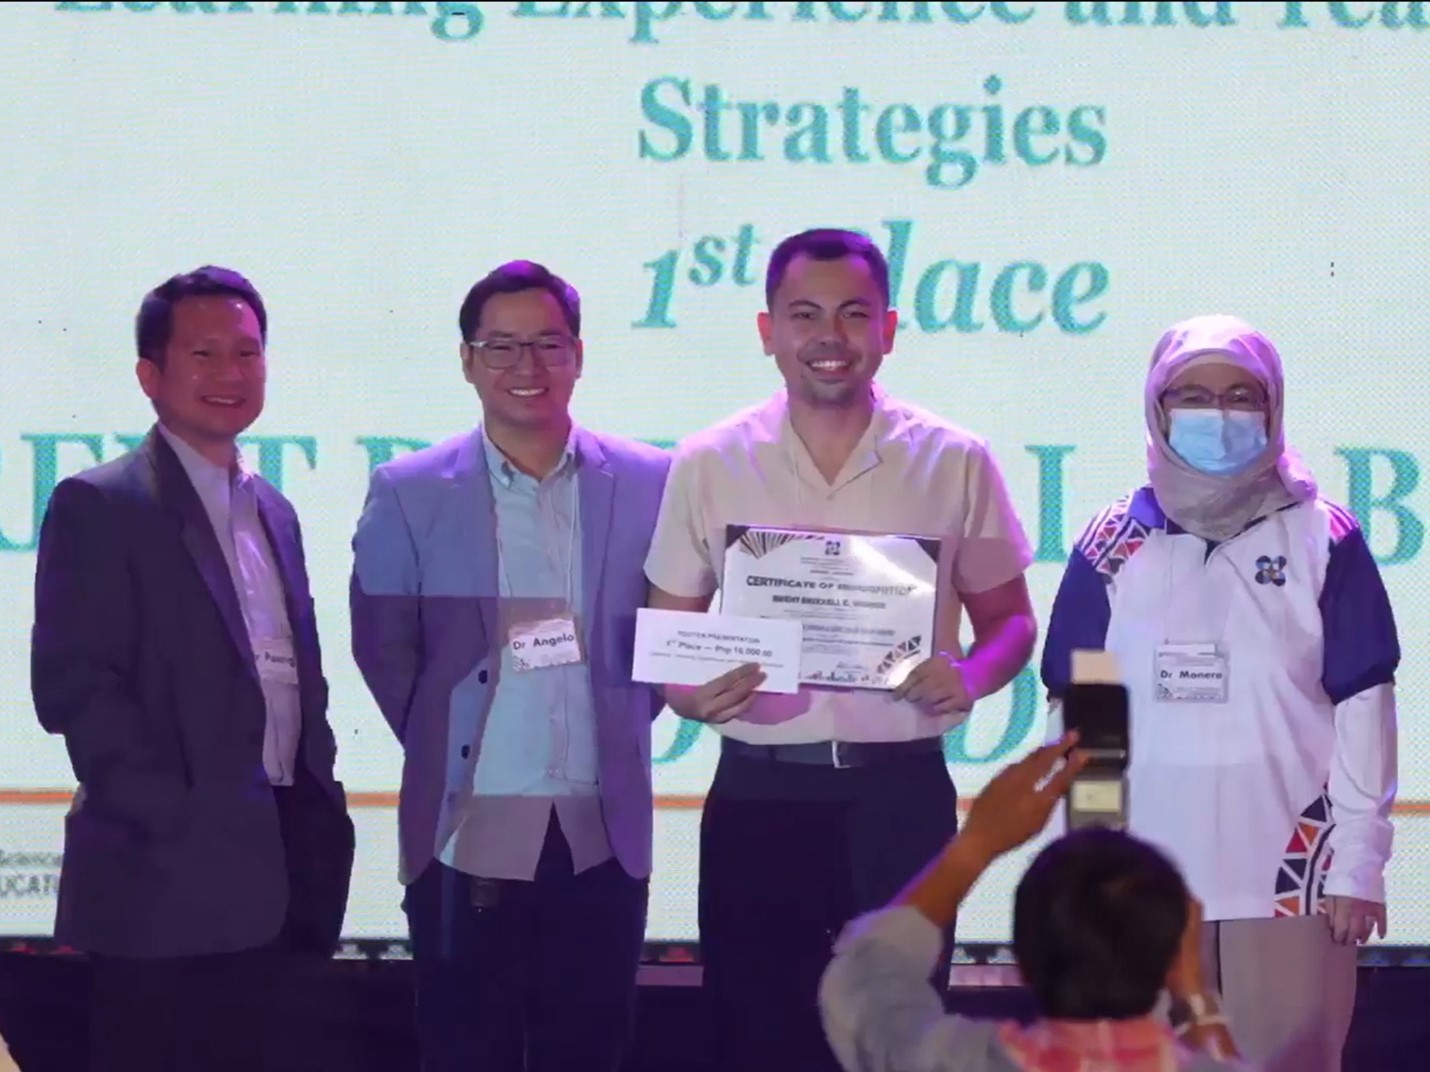 Awarding: Mr. Brent Brixxell G. Bonior_1st Place Poster Presentation Learning Experiences and Teaching Strategies Category